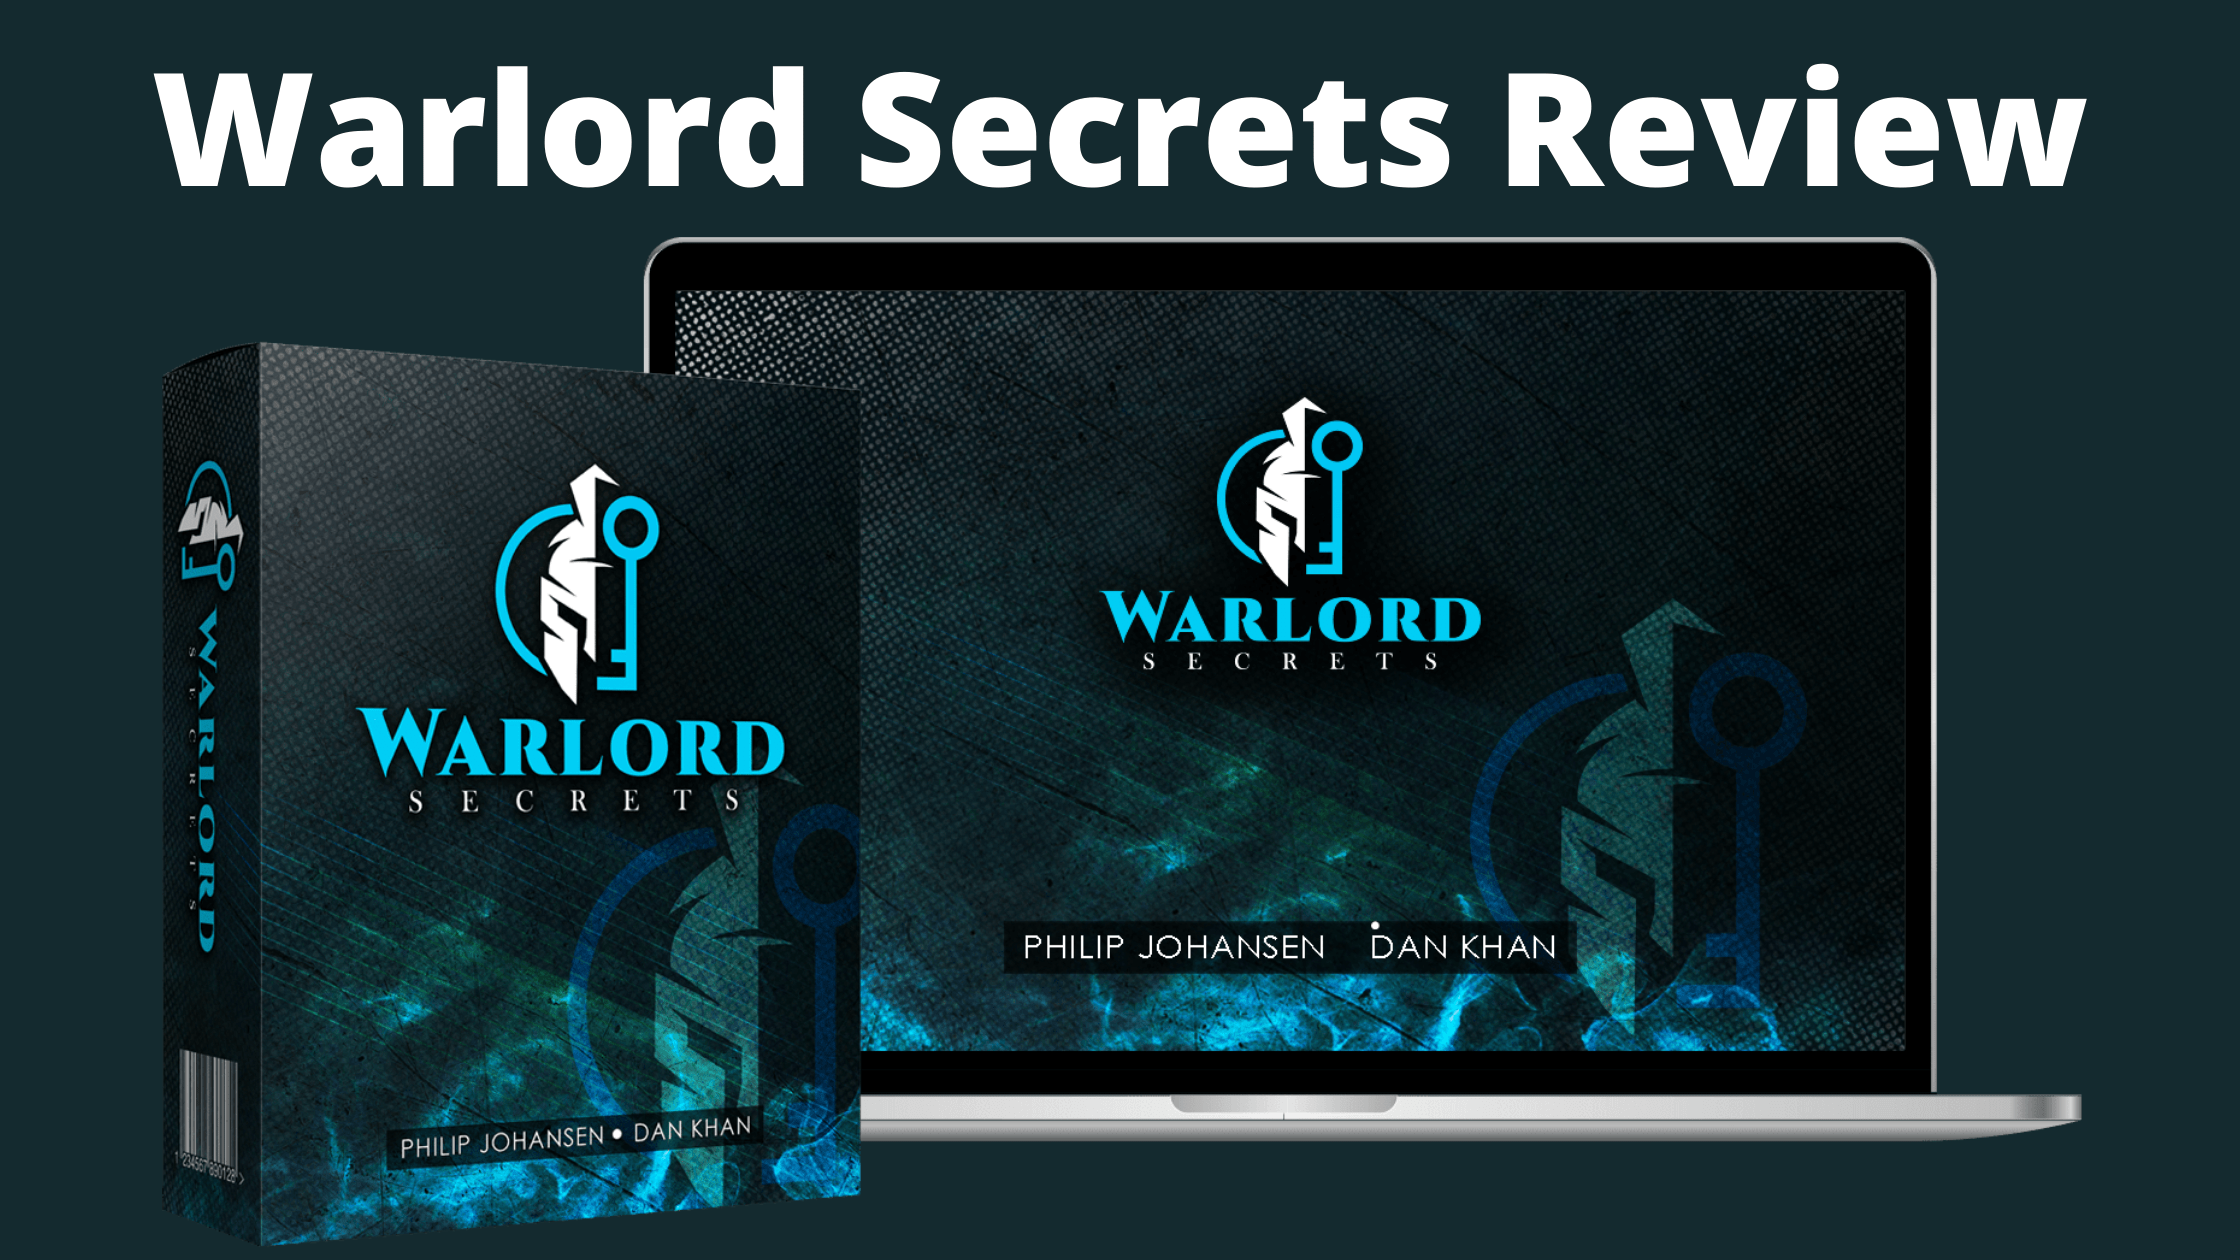 Warlord Secrets Review